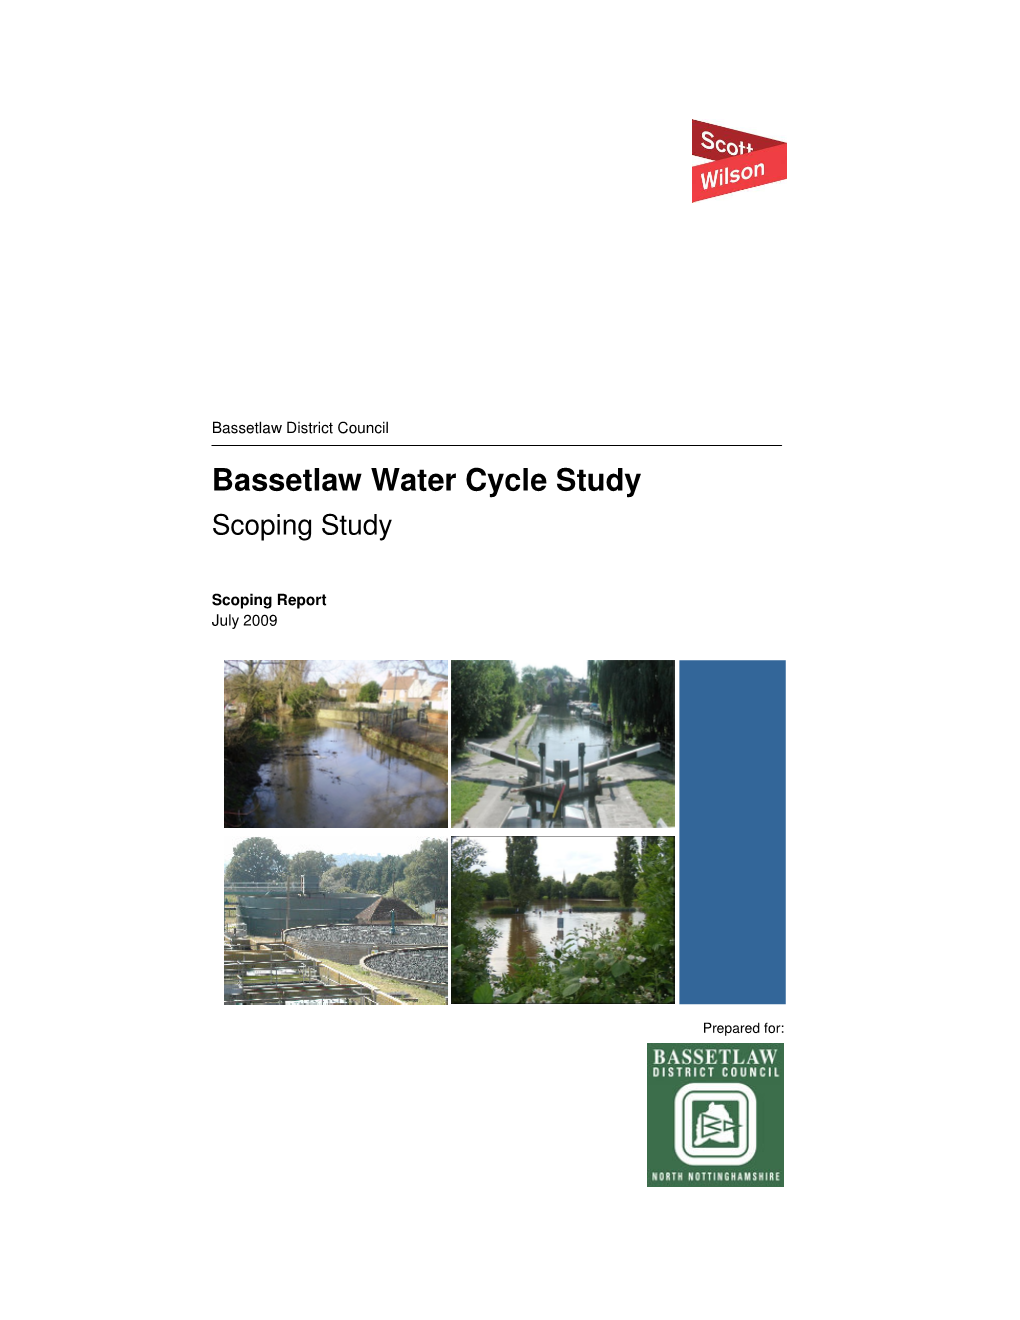 Bassetlaw Water Cycle Study Scoping Study